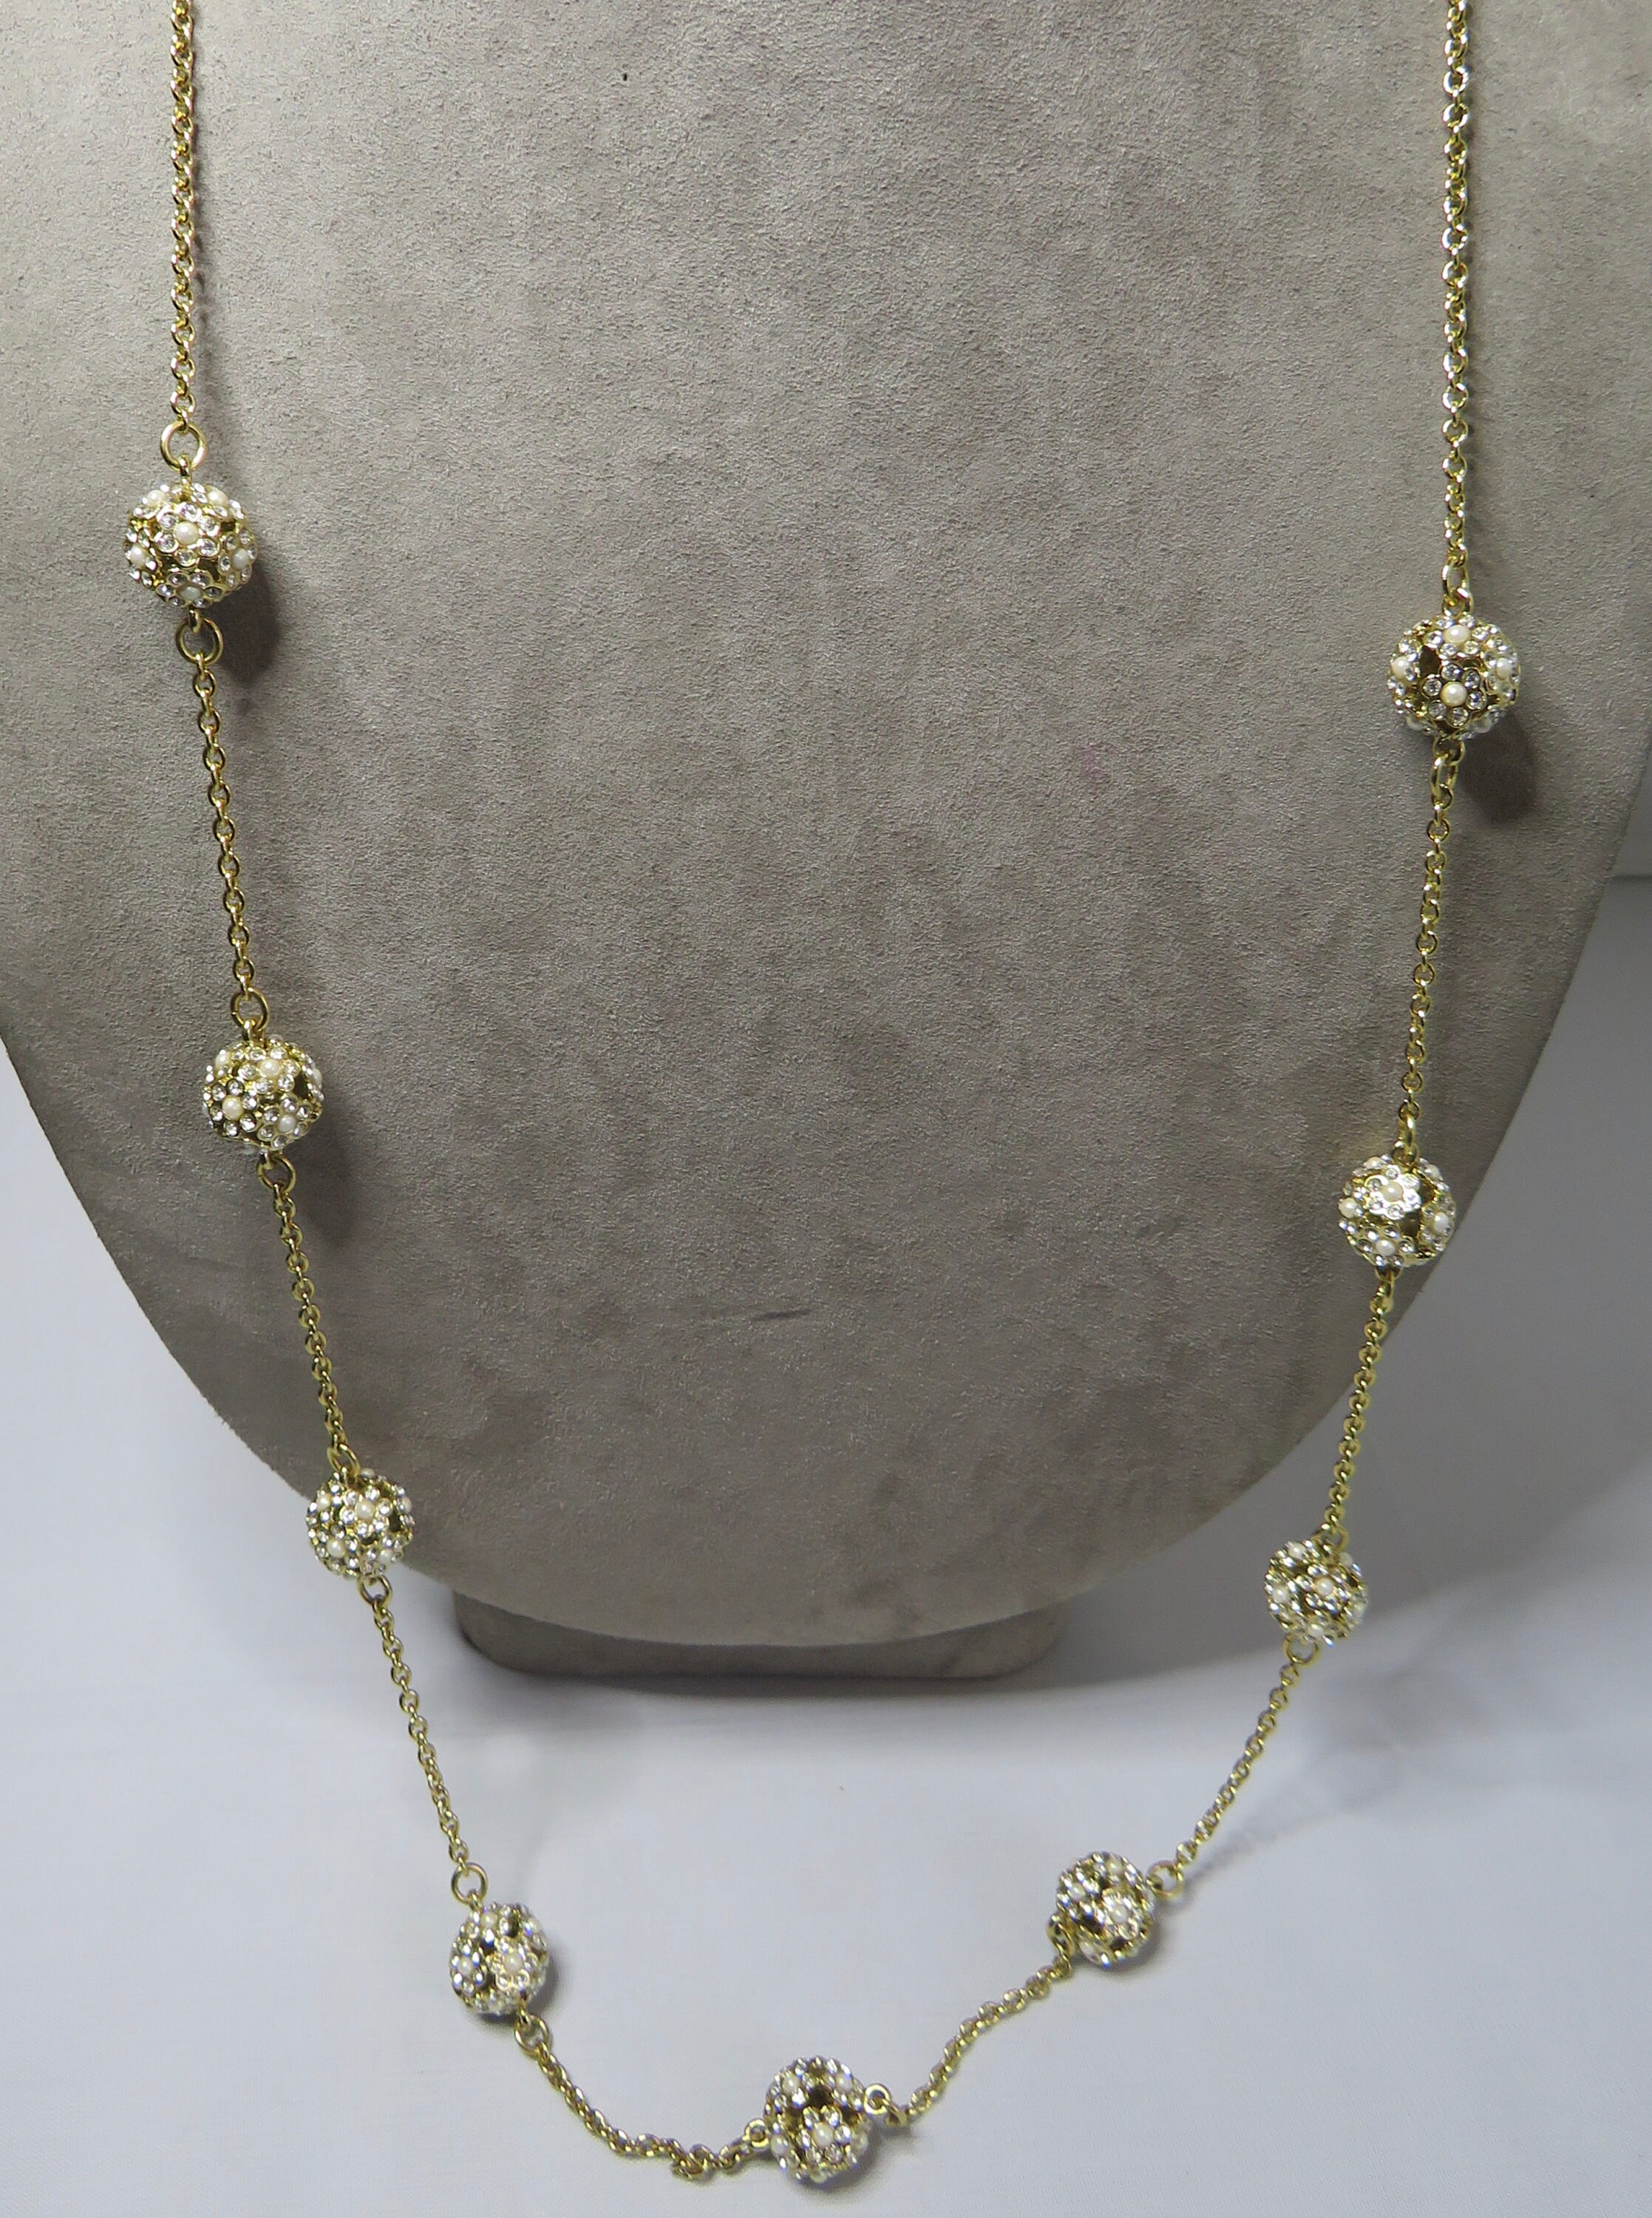 KATE SPADE Signed Rhinestone & Pearl Flower Ball Long Necklace - Etsy